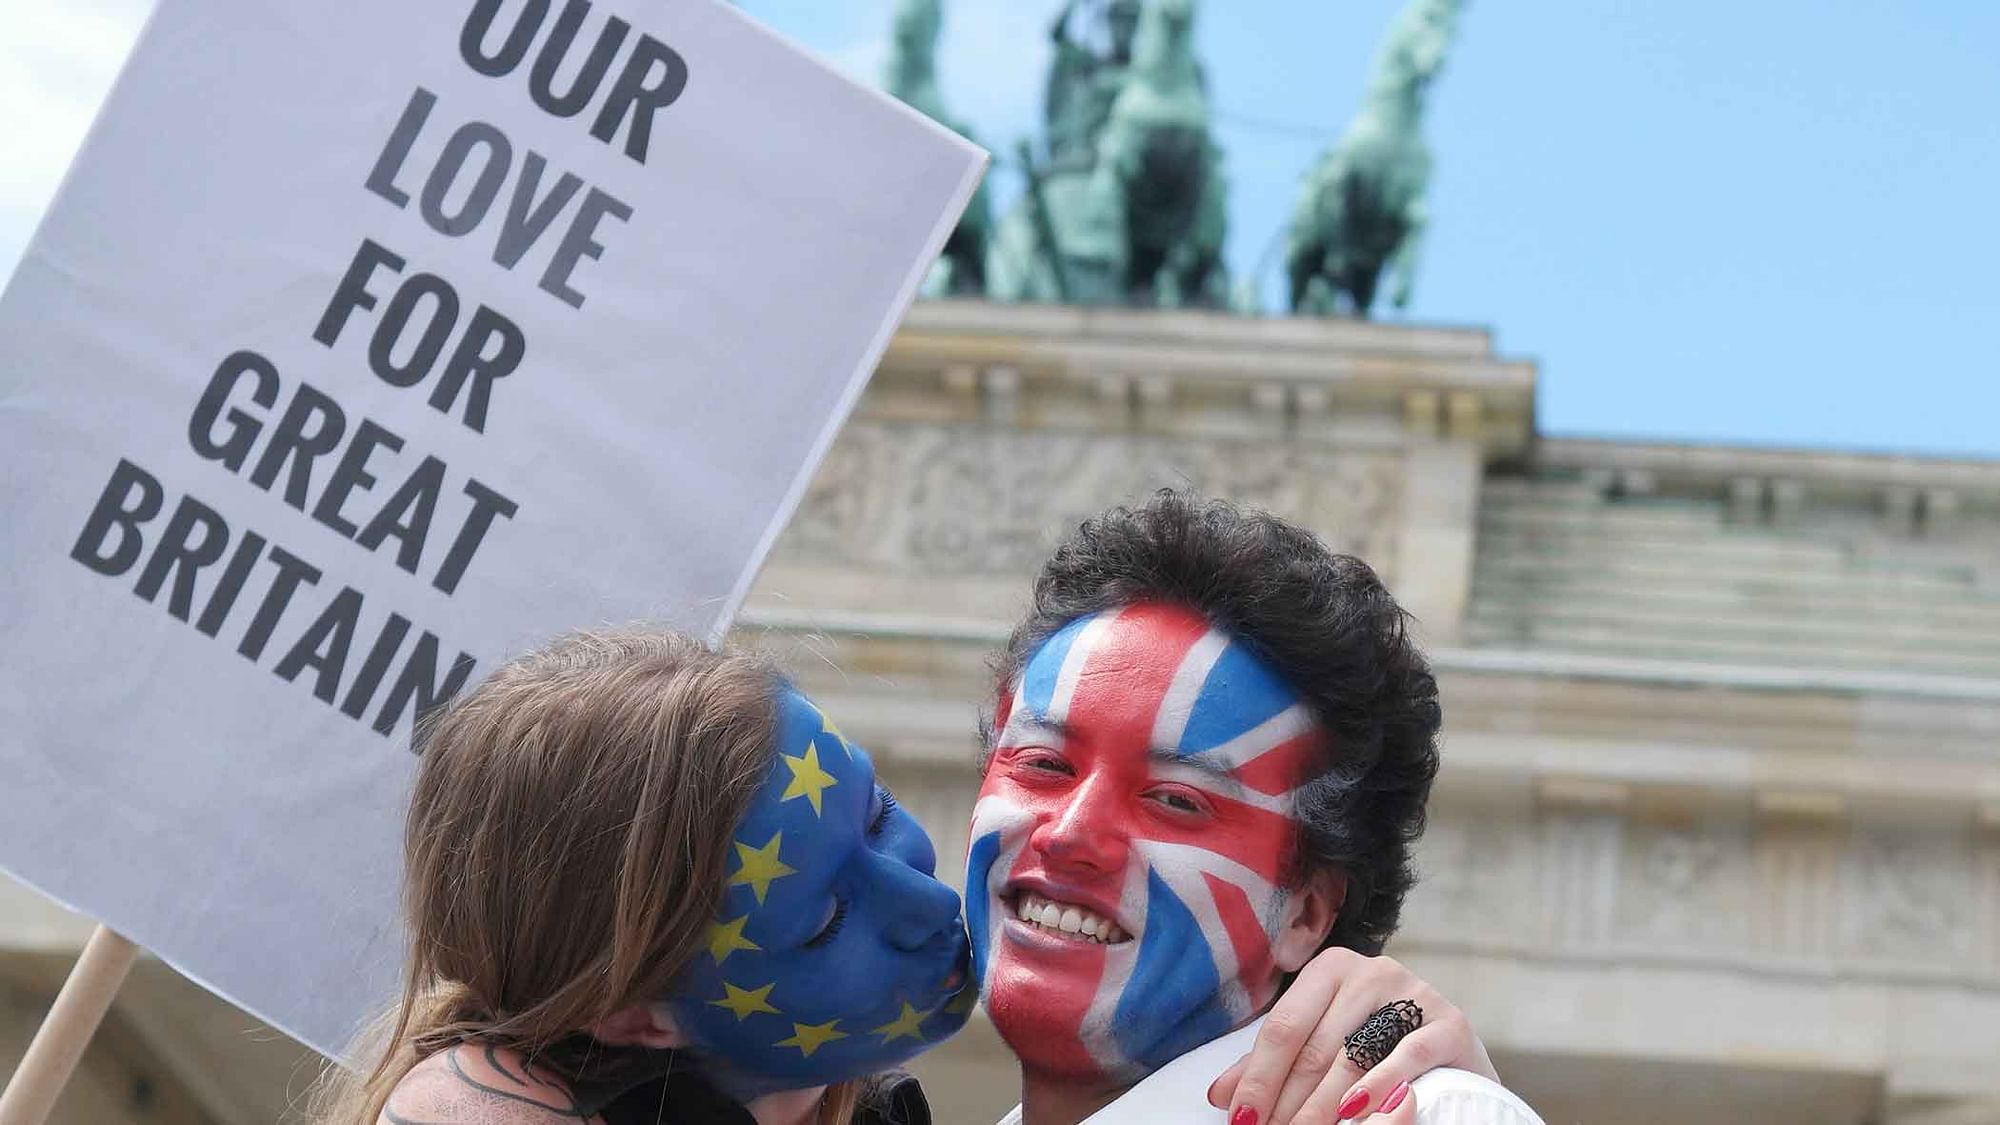 A young couple with faces paint in European Union, left, and British colors, pose with a sign “Our Love For Great Britain”  in Berlin on Sunday  to support the ‘ Remain’ voters in Britain’s referendum. (Photo: AP)